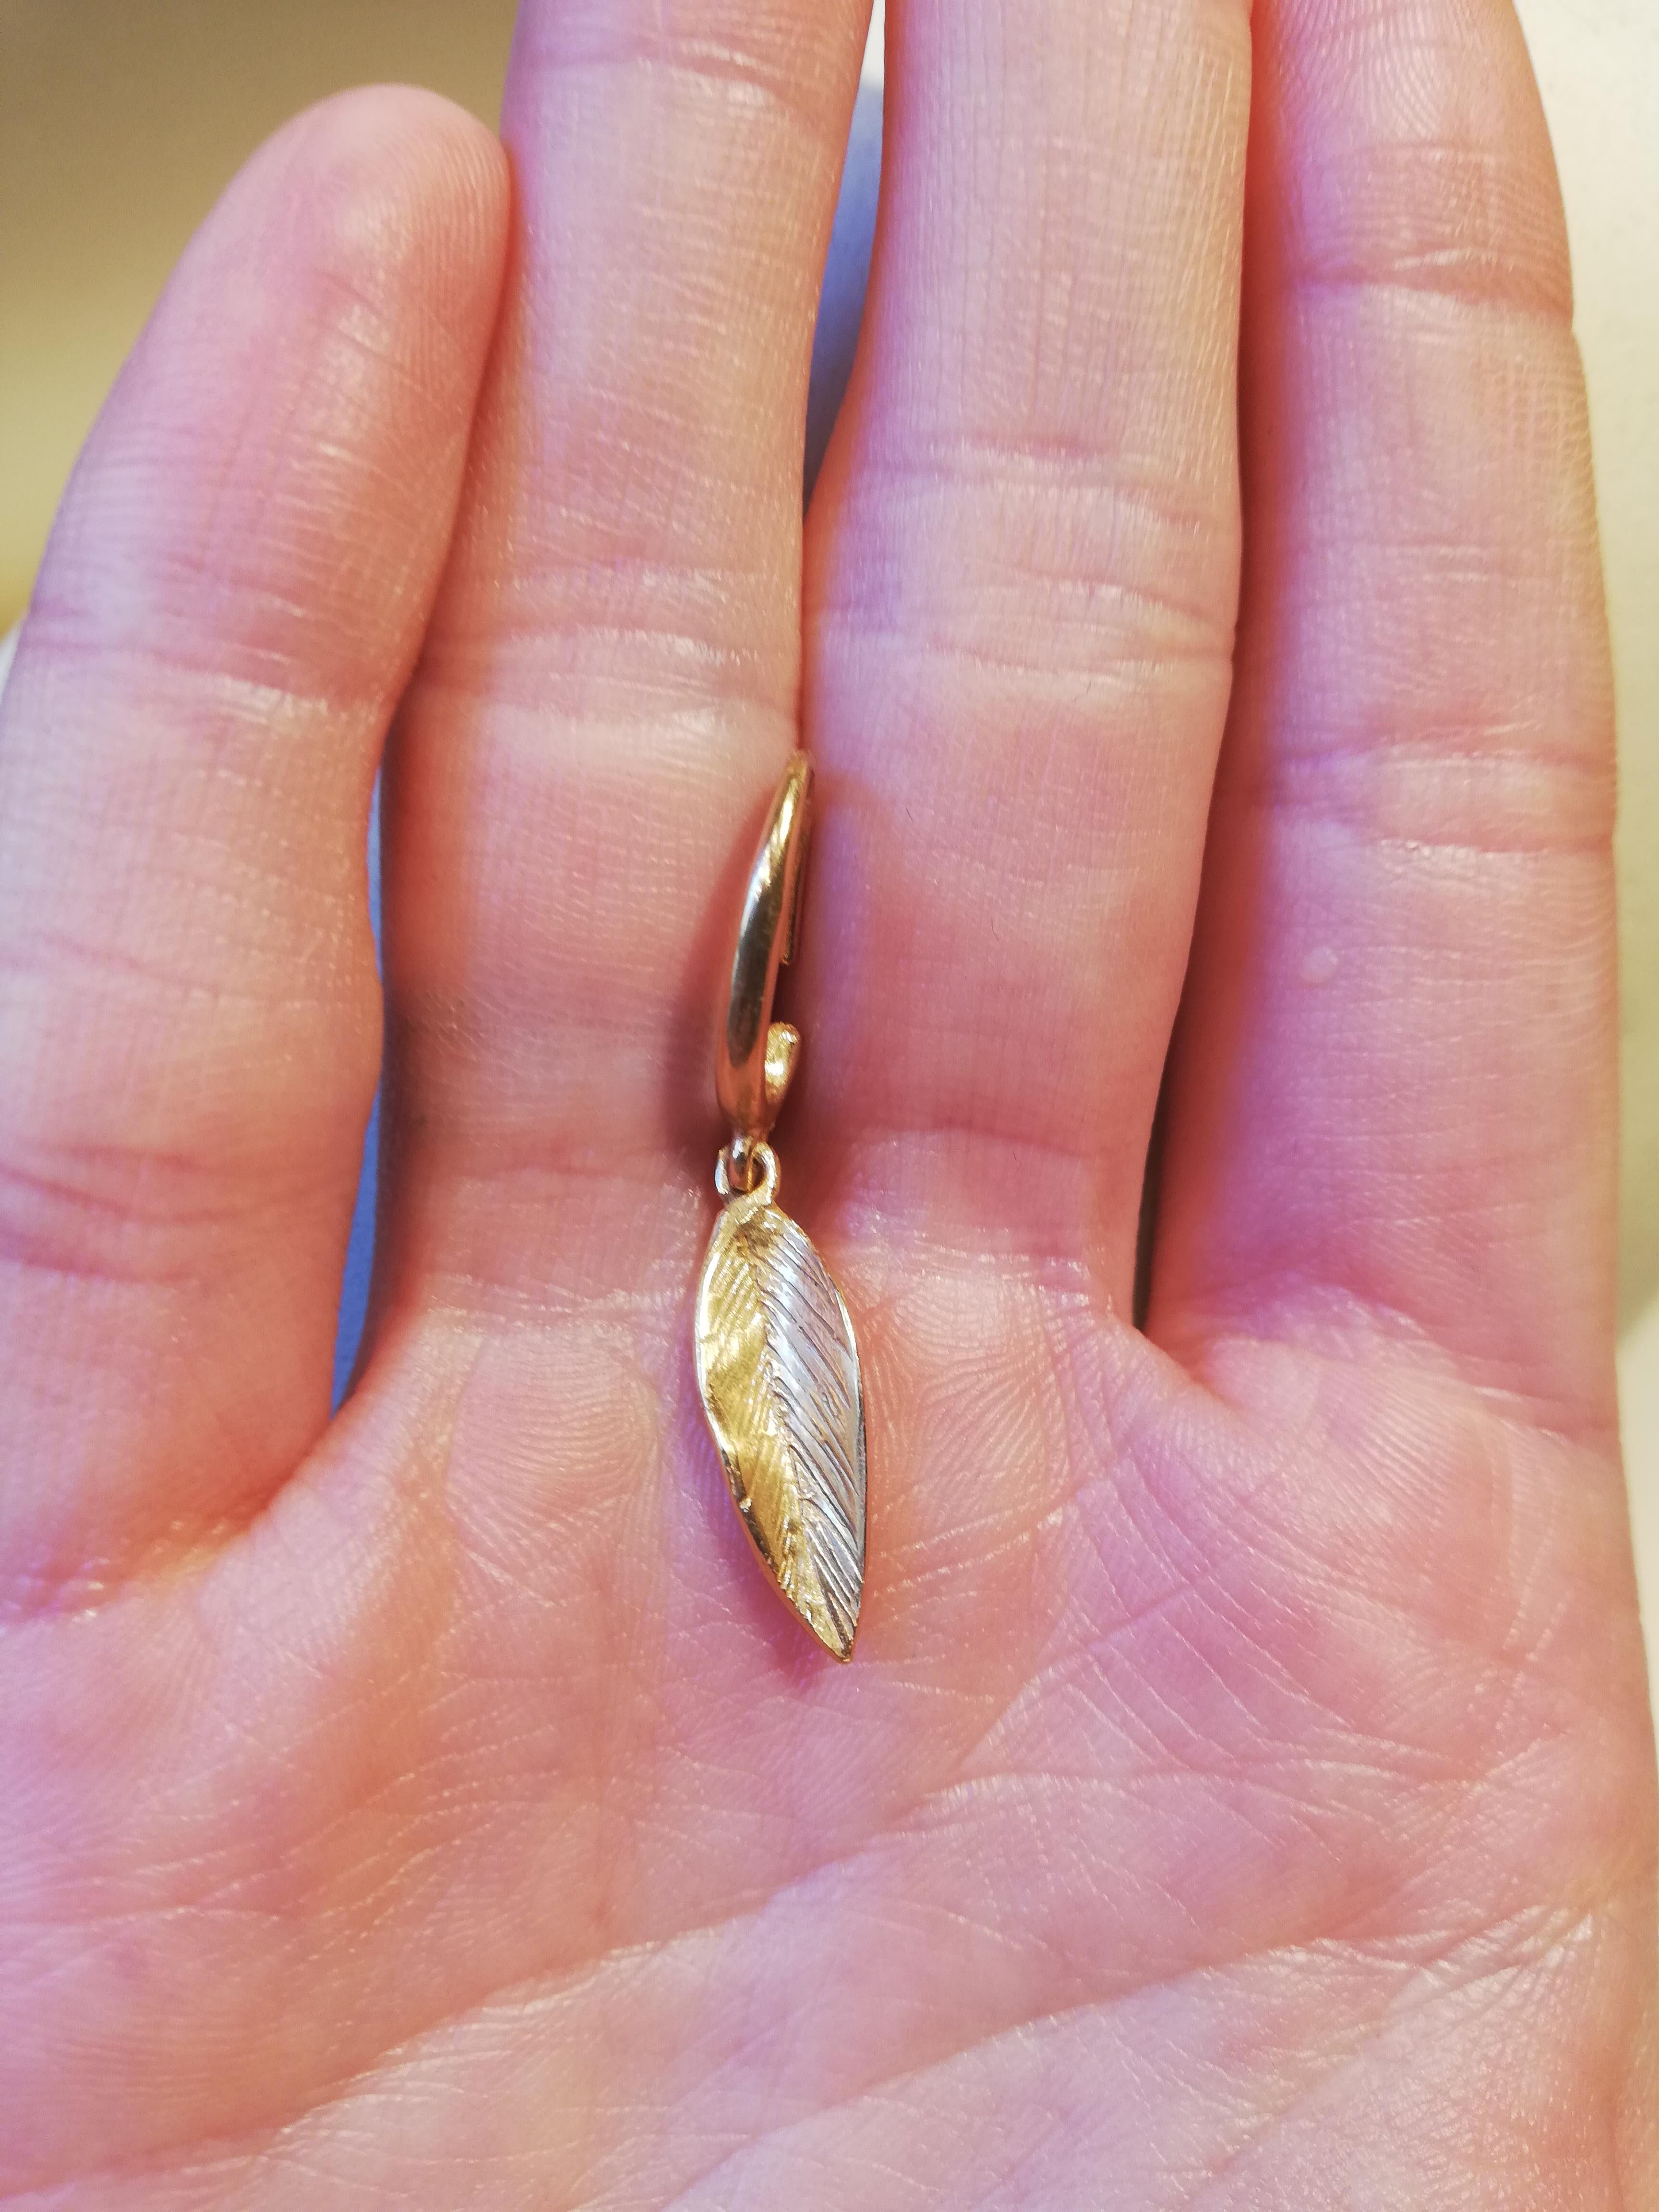 Giulia Barela Jewelry Mobile Leaves Small Earrings 18 Karat Gold In New Condition For Sale In Rome, IT